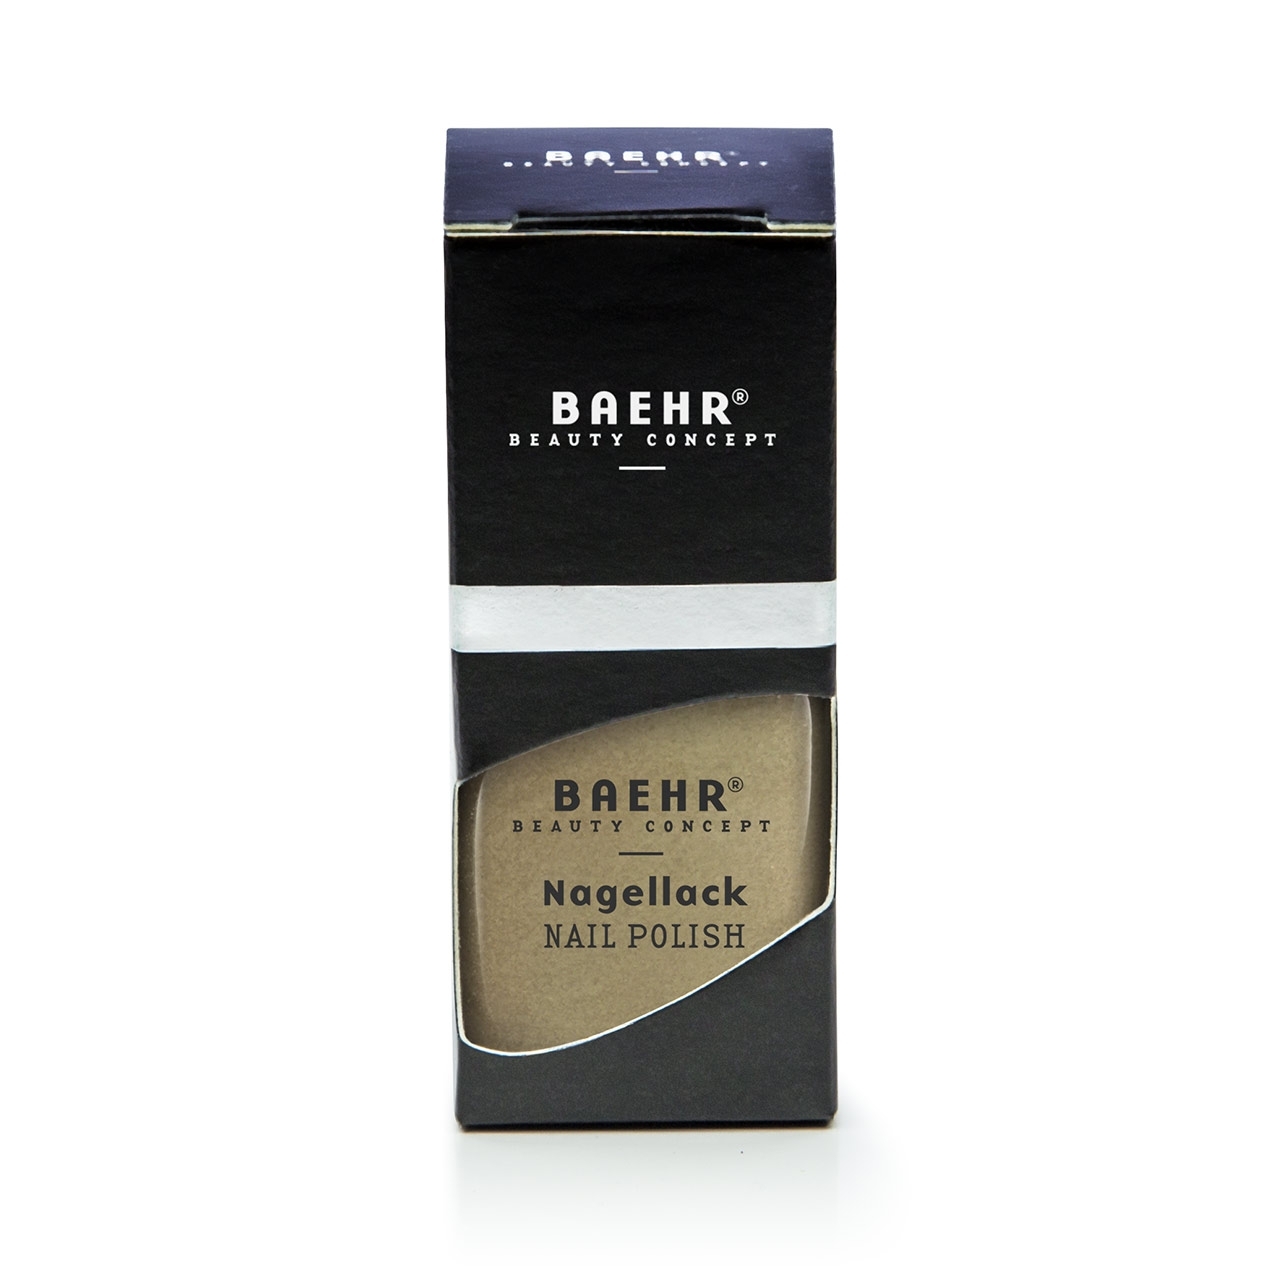 BAEHR BEAUTY CONCEPT - NAILS Nagellack prosecco 11 ml